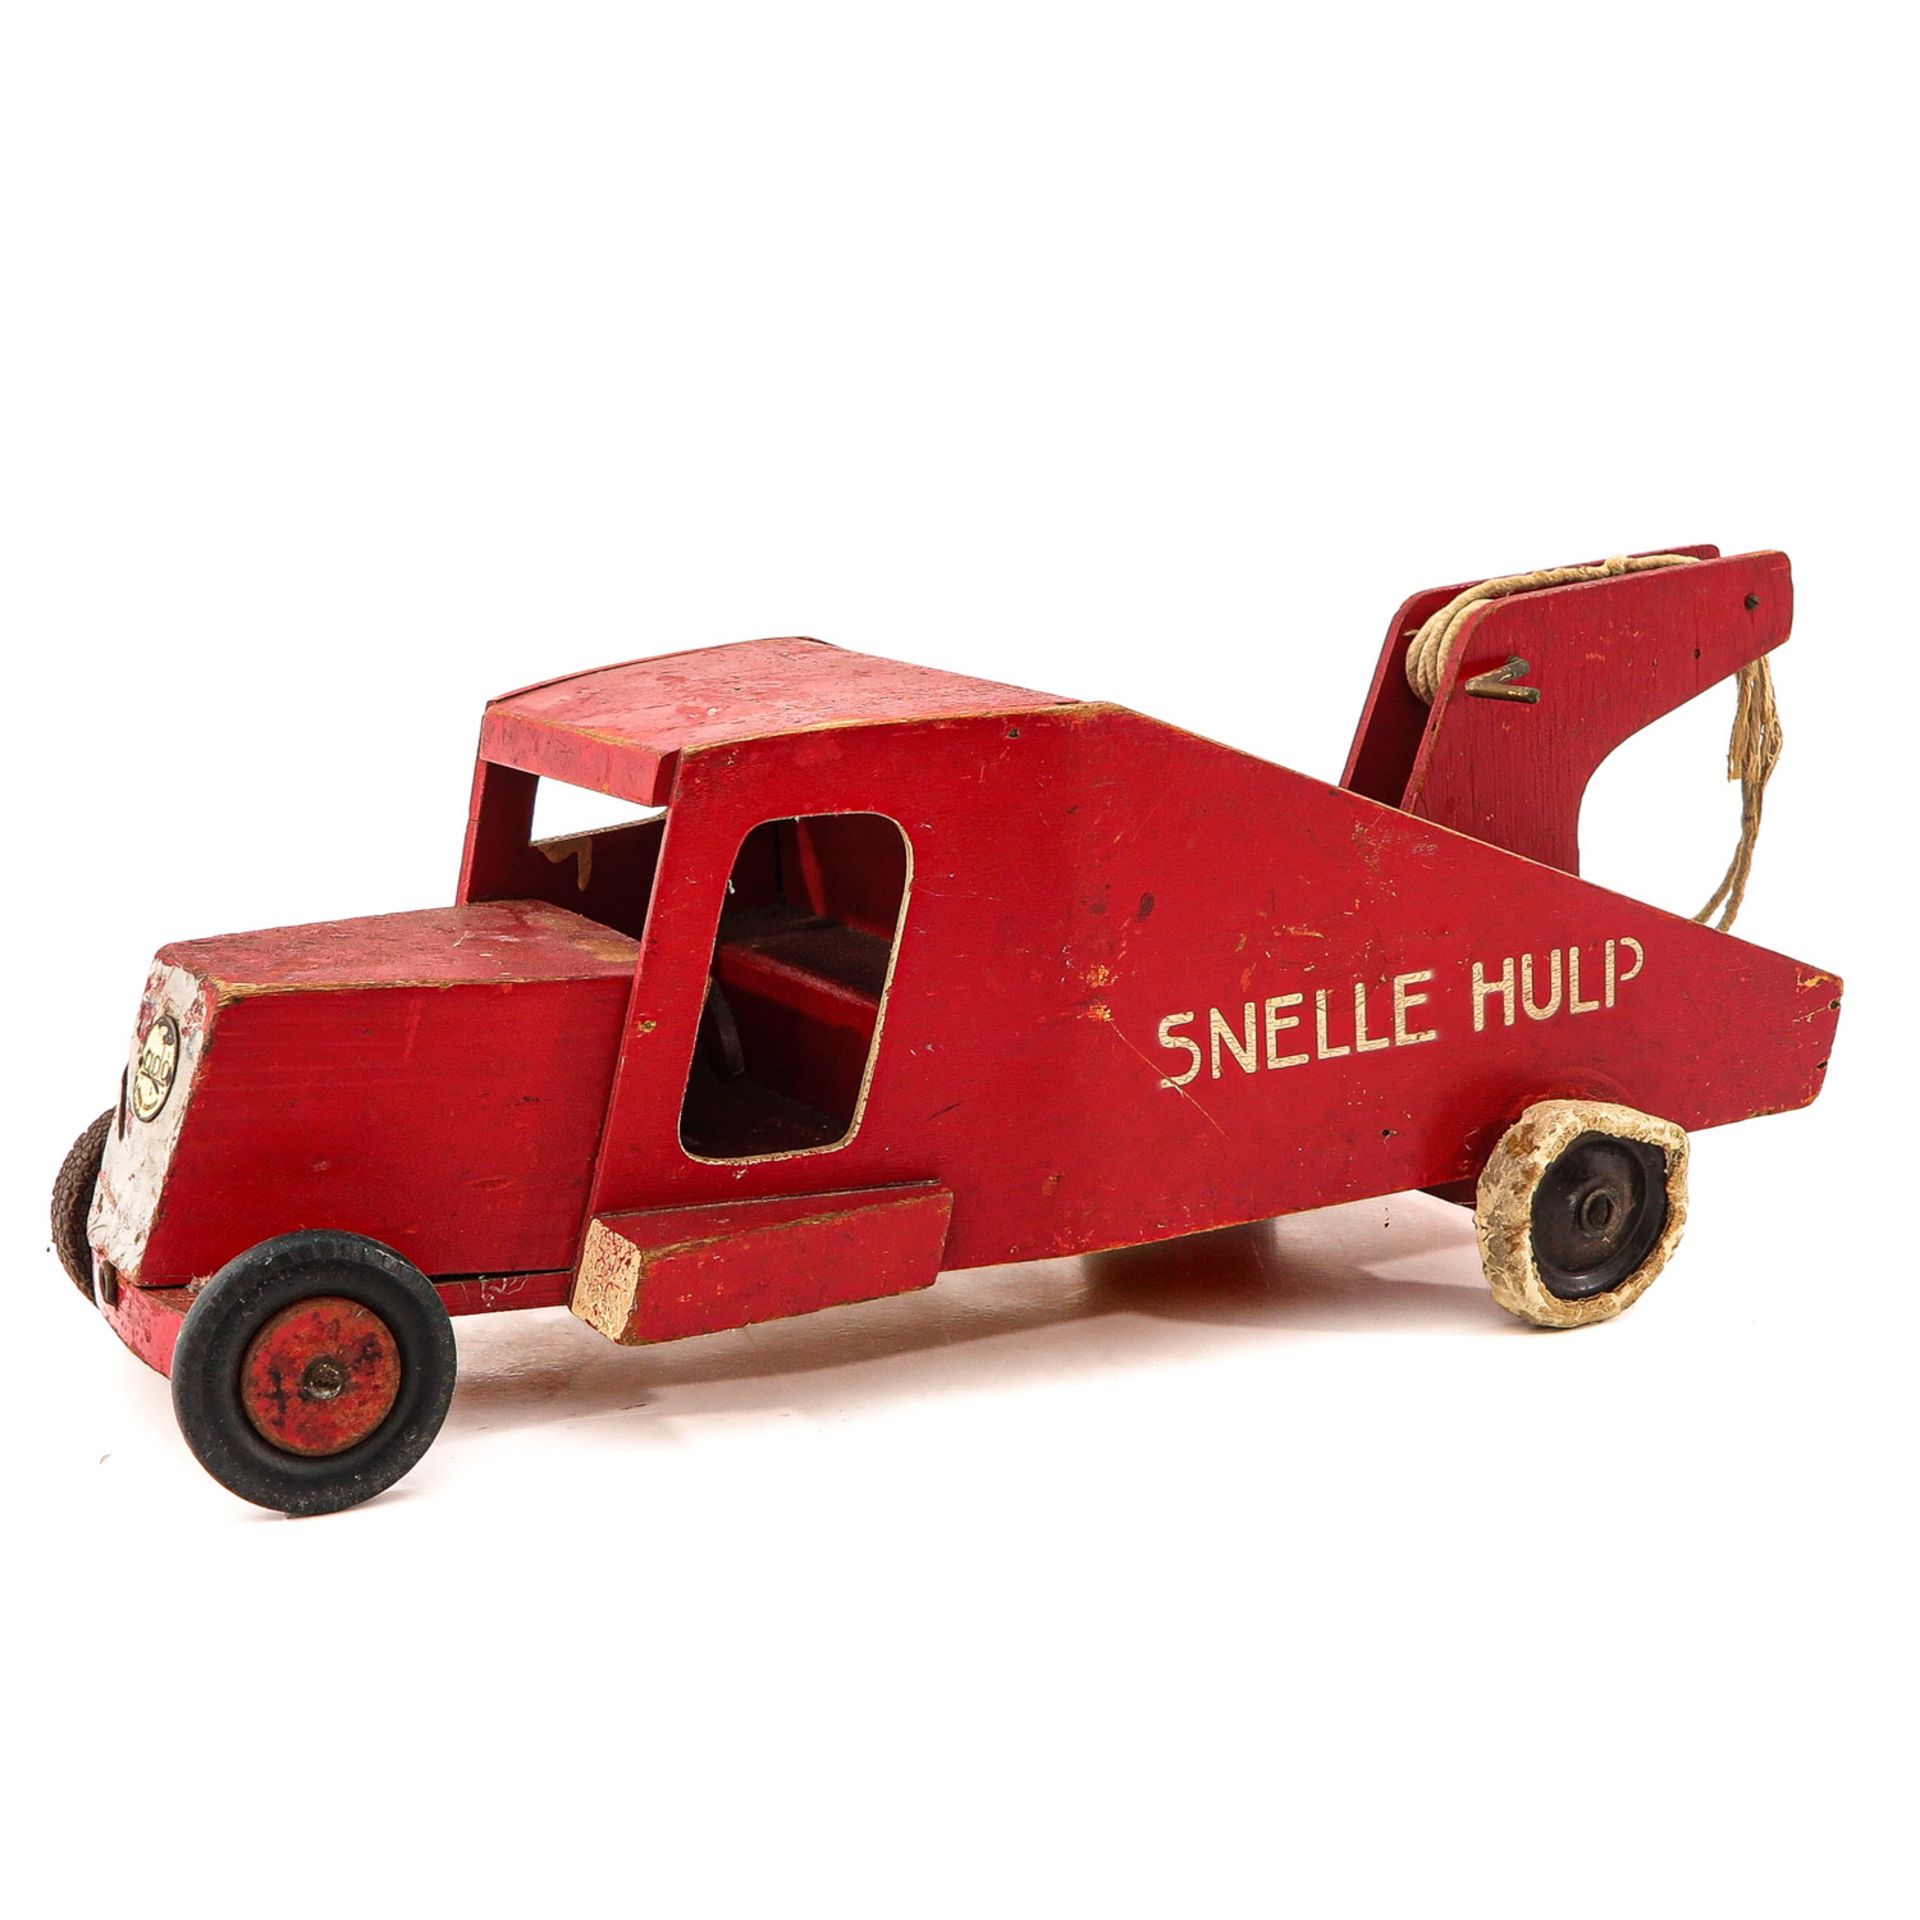 An ADO Wood Toy Truck